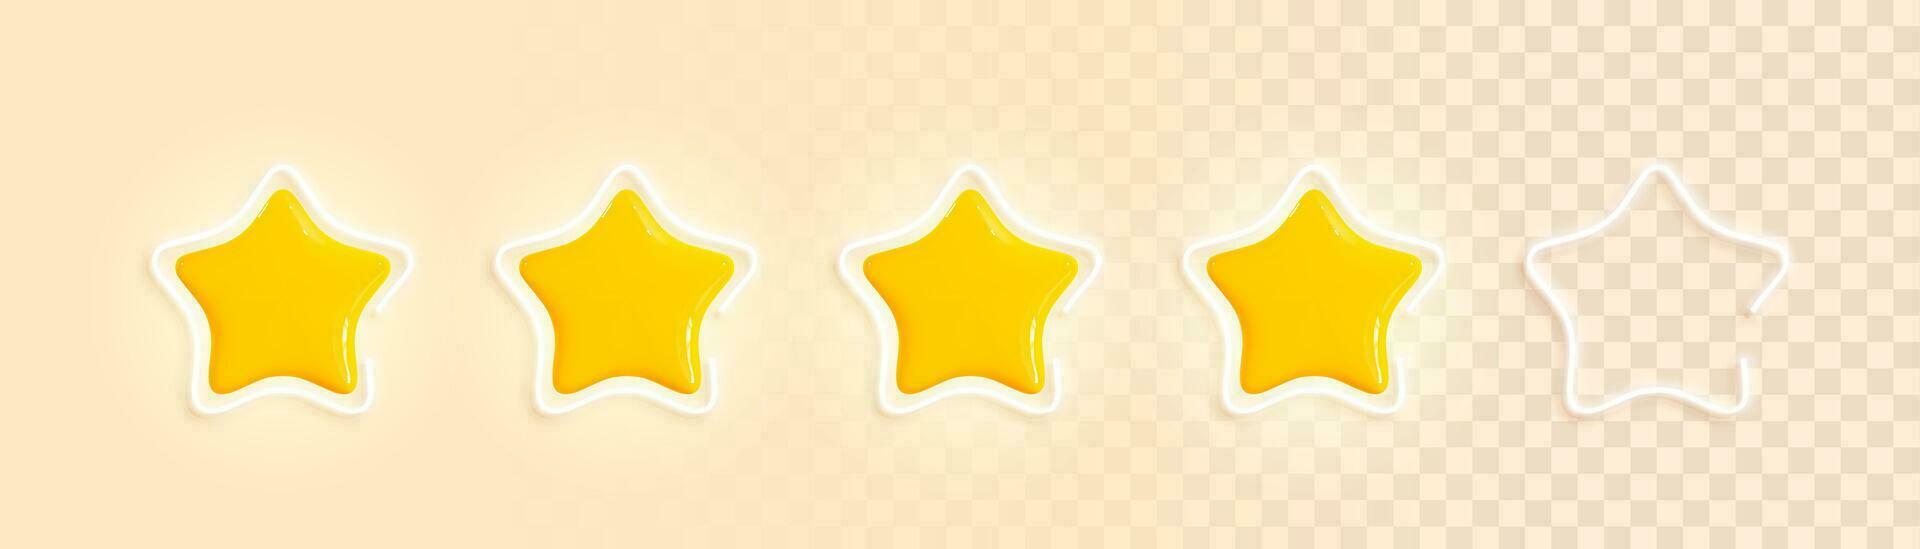 Five glossy golden 3d stars with white neon frames in realistic style. Symbol design for game, ui, feedback, website. Rating concept. Yellow plastic stars on a light background. Vector illustration